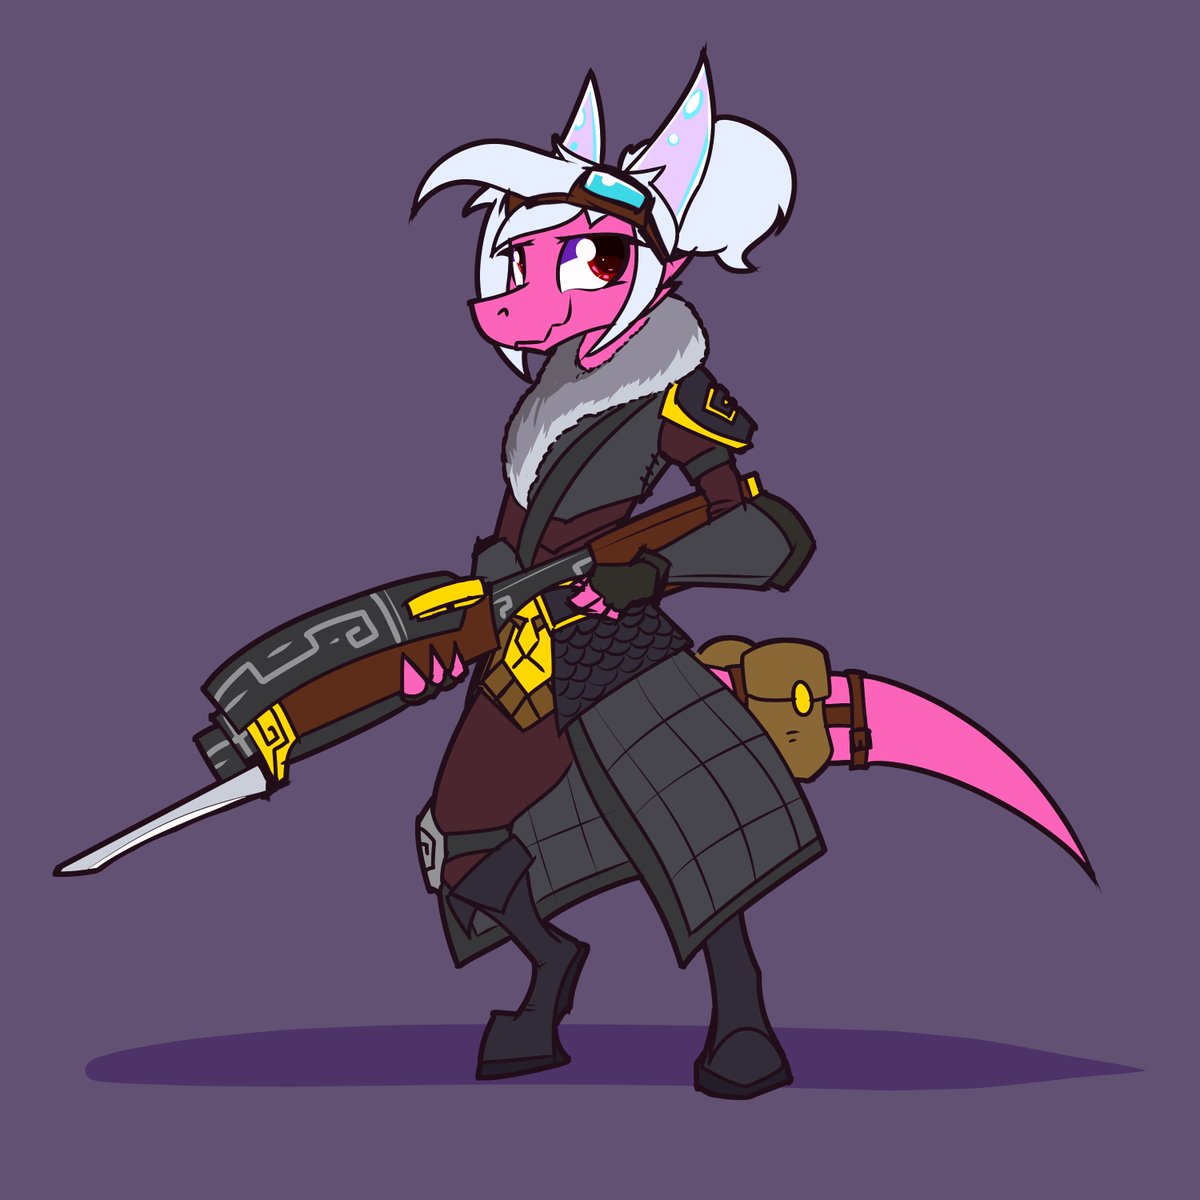 Sketch n' Flats commission for @Fallen1452 of their cute kobold artificer Flick!